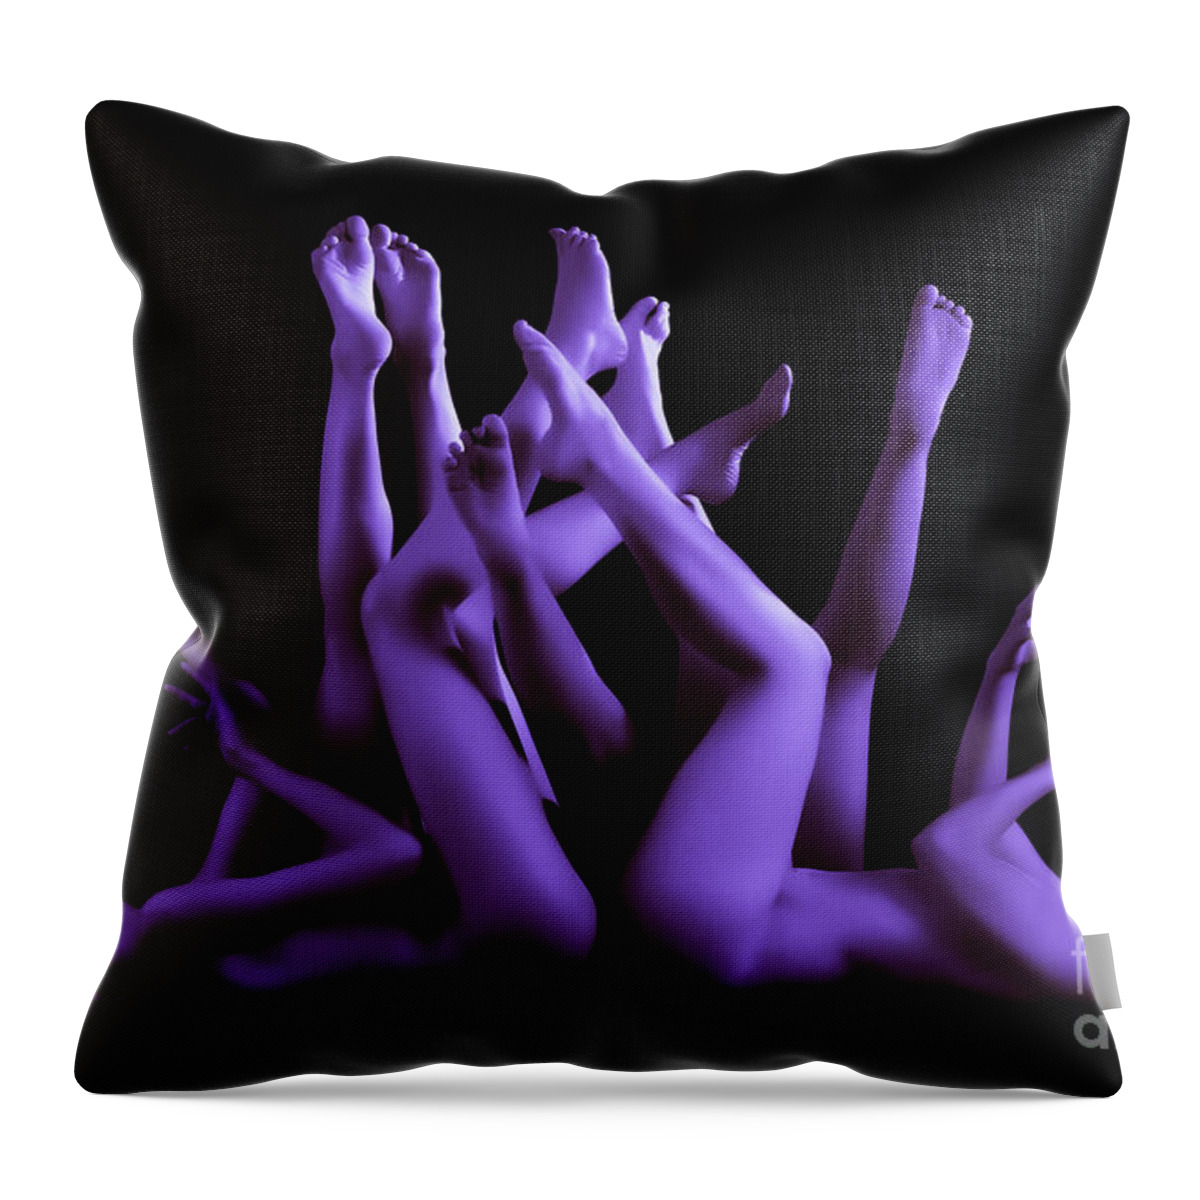 Artistic Throw Pillow featuring the photograph Midnight forest by Robert WK Clark